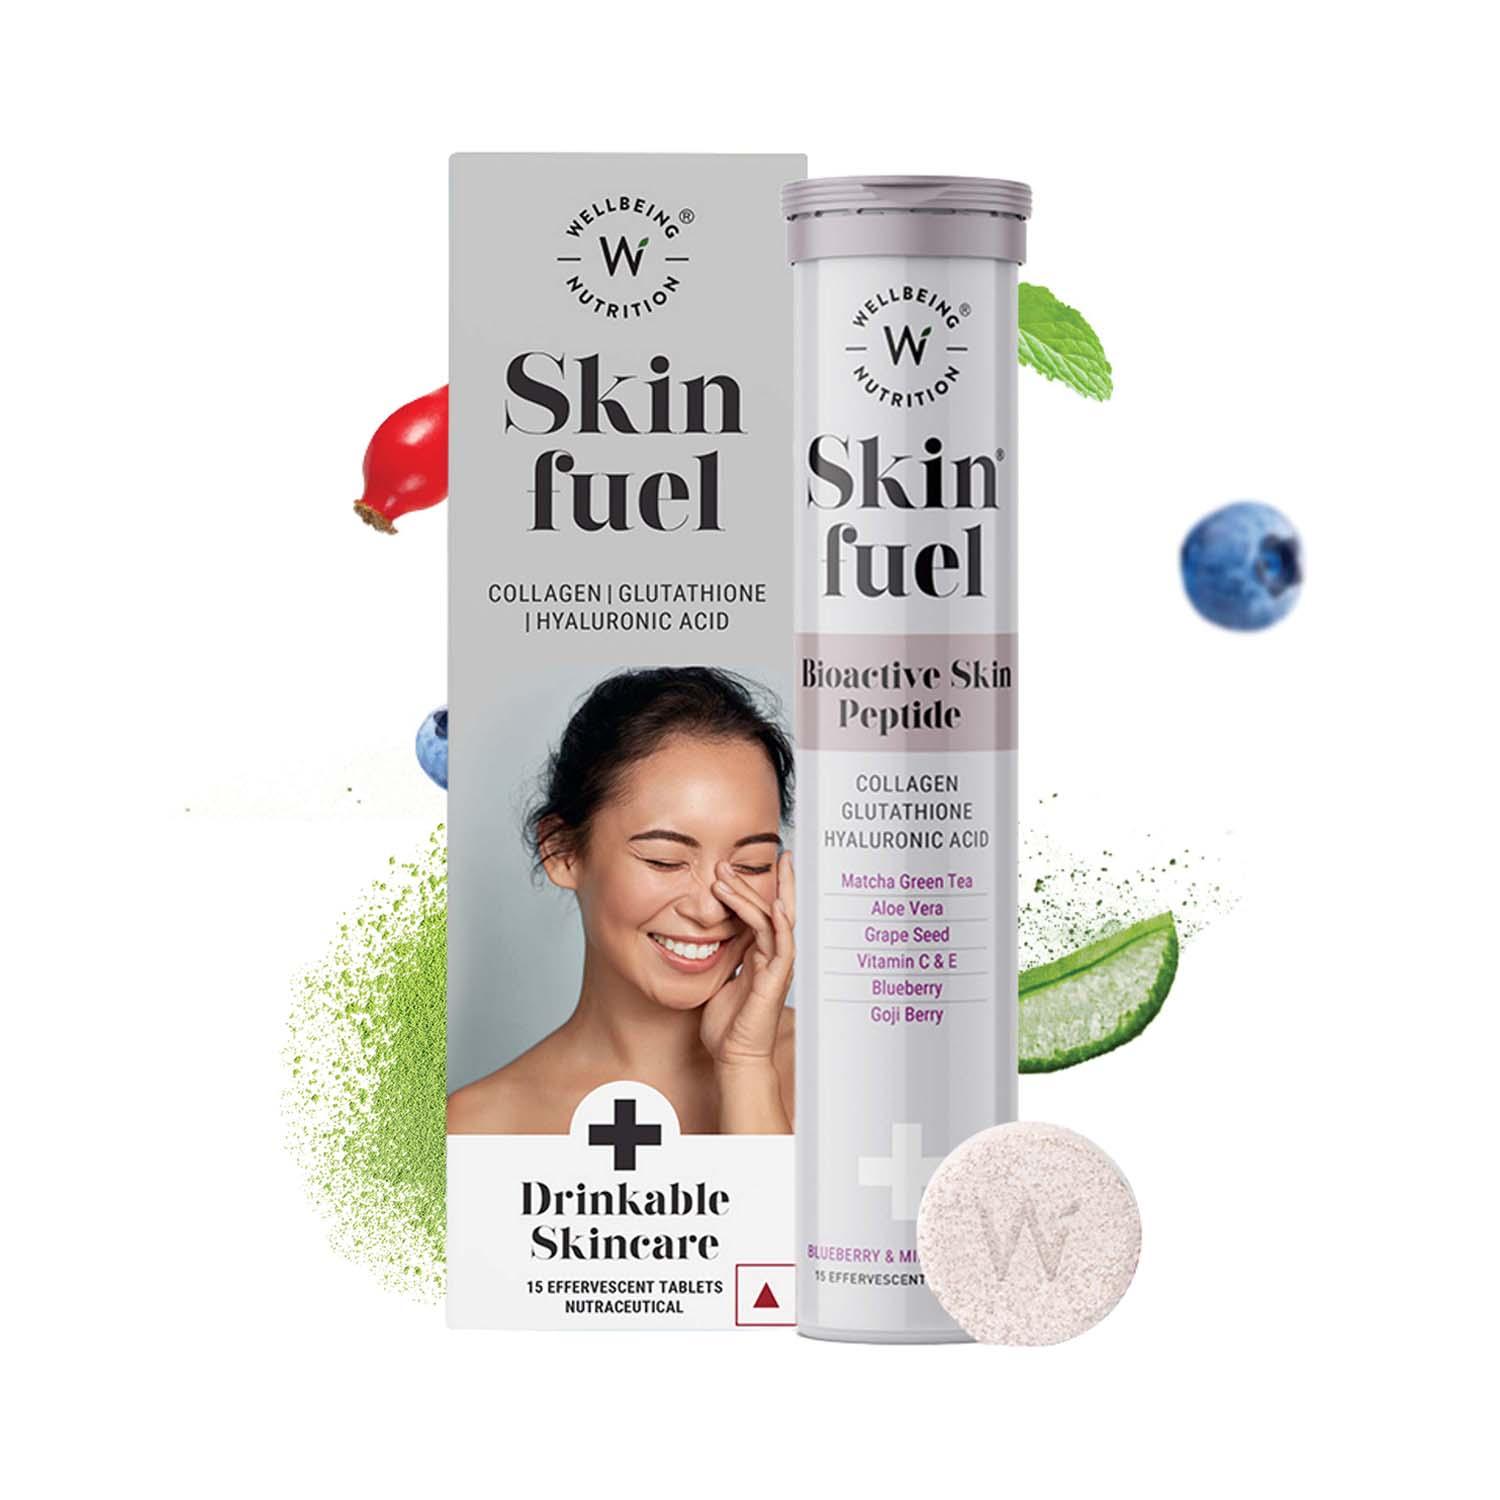 Wellbeing Nutrition | Wellbeing Nutrition Skin Fuel Japanese Collagen Peptides, L-Glutathione, Antioxidants | Hyaluronic Acid, Grape Seed, Vitamin E